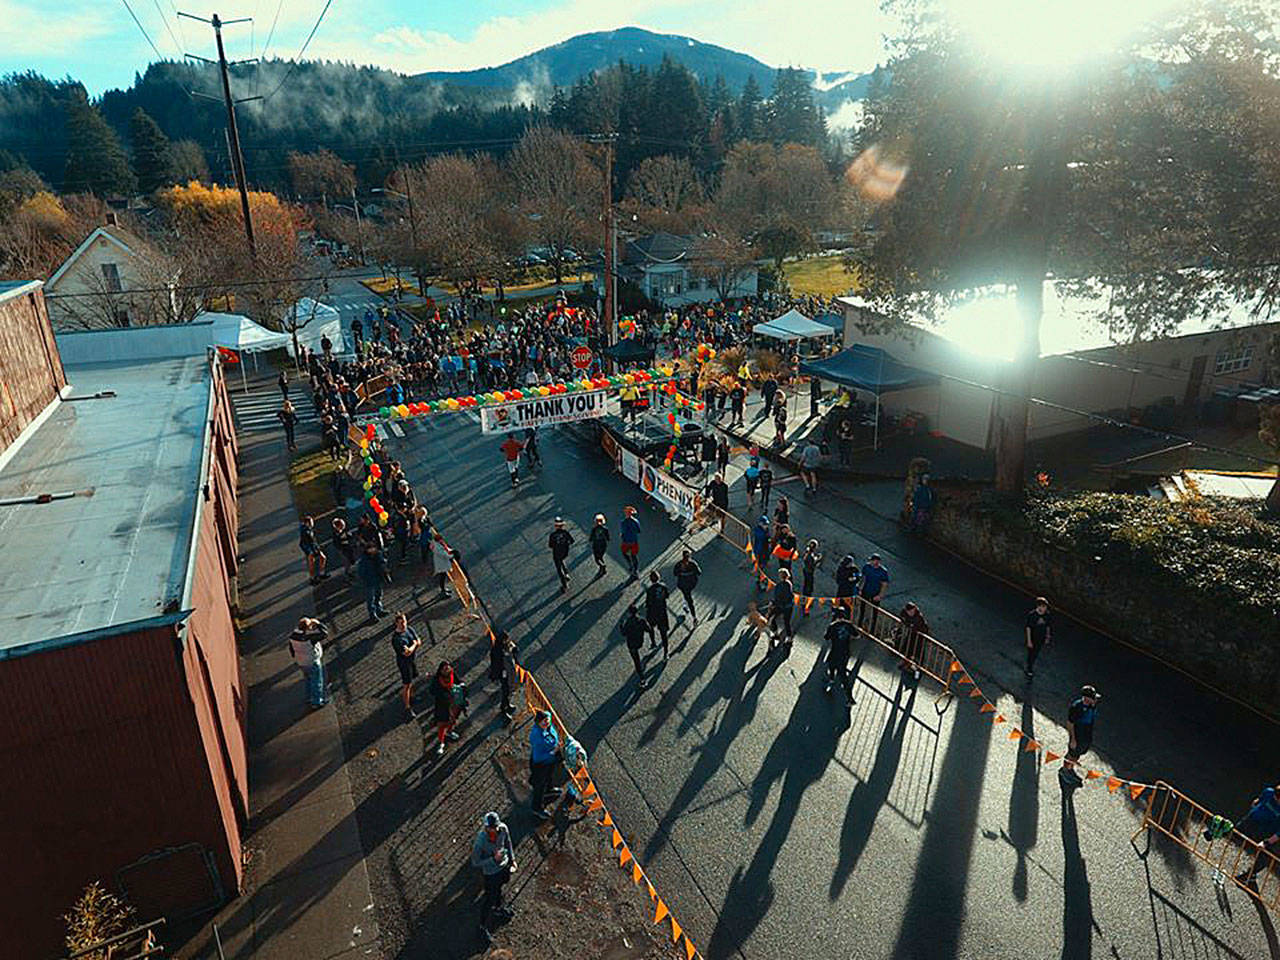 The start/finish line will be on Bush St., between the Issaquah Food and Clothing Banks and the Issaquah Center. The route goes through downtown Issaquah. Photo courtesy of Turkey Trot Facebook